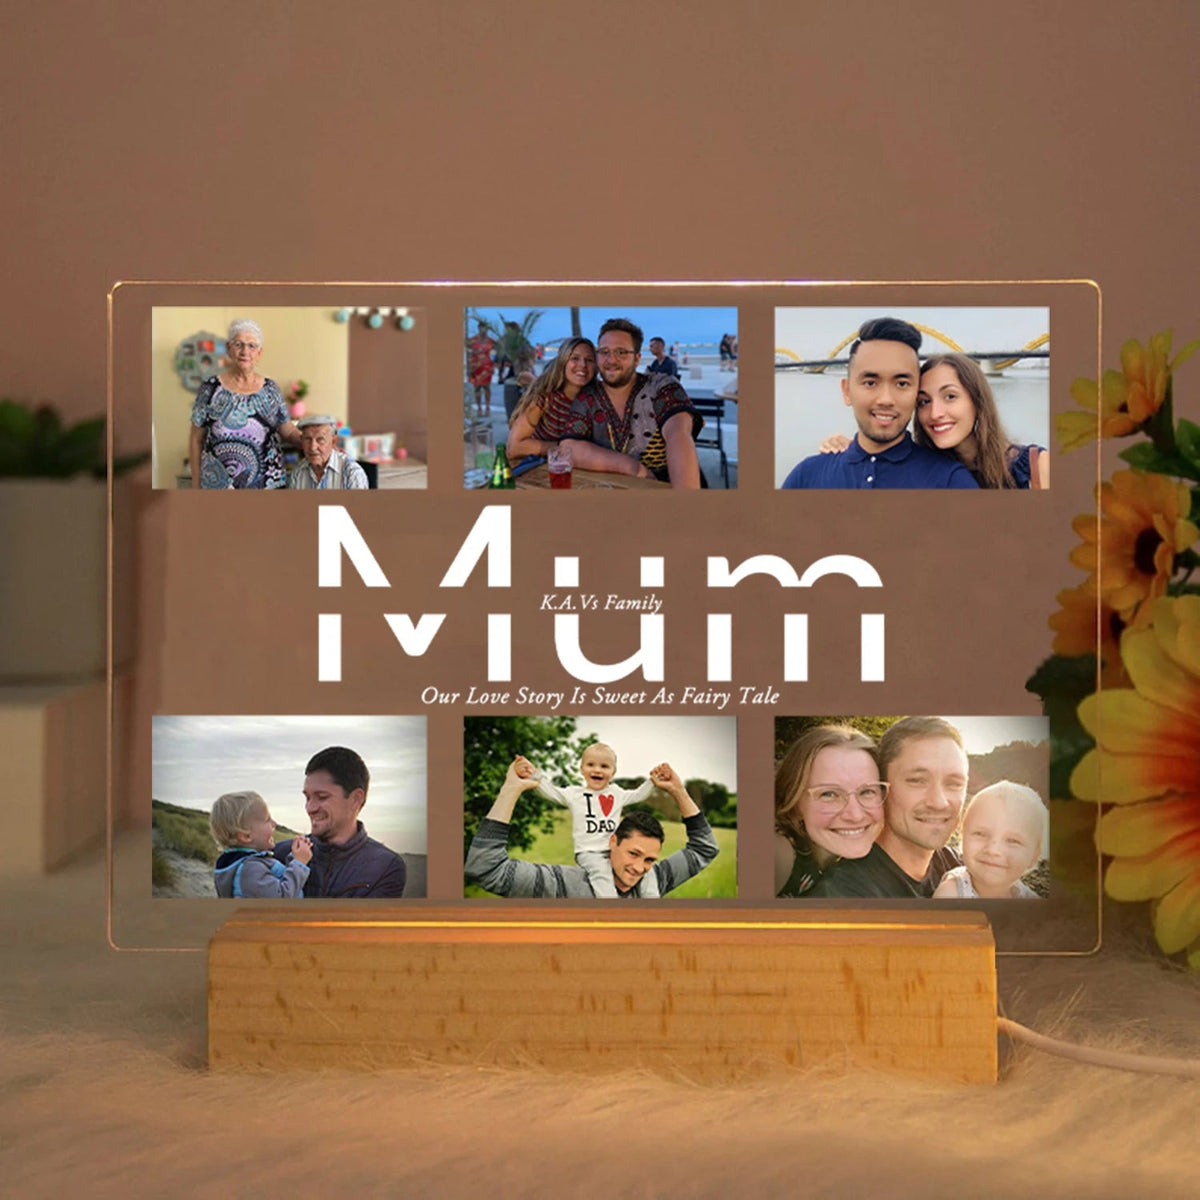 Personalized Custom Photo Text 3D Acrylic Lamp - Customized Bedroom Night Light for MOM DAD LOVE Family Day Christmas Birthday Gift Warm Light / Mum